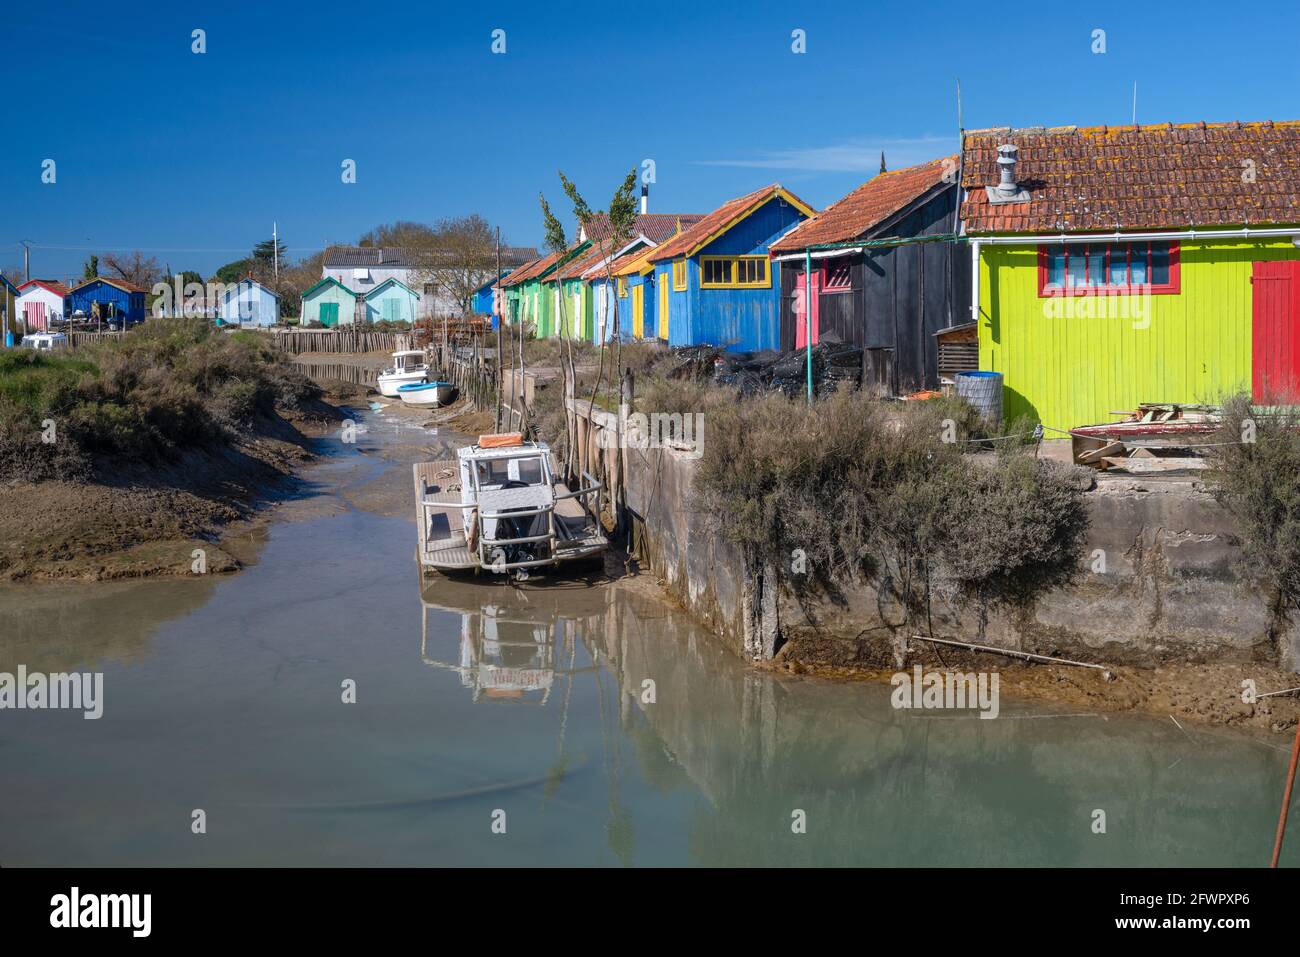 Chateau Oleron fishing harbour colourful cabins and oyster farming boats at Oleron Island, Charente Maritime, France on west Atlantic coast Stock Photo